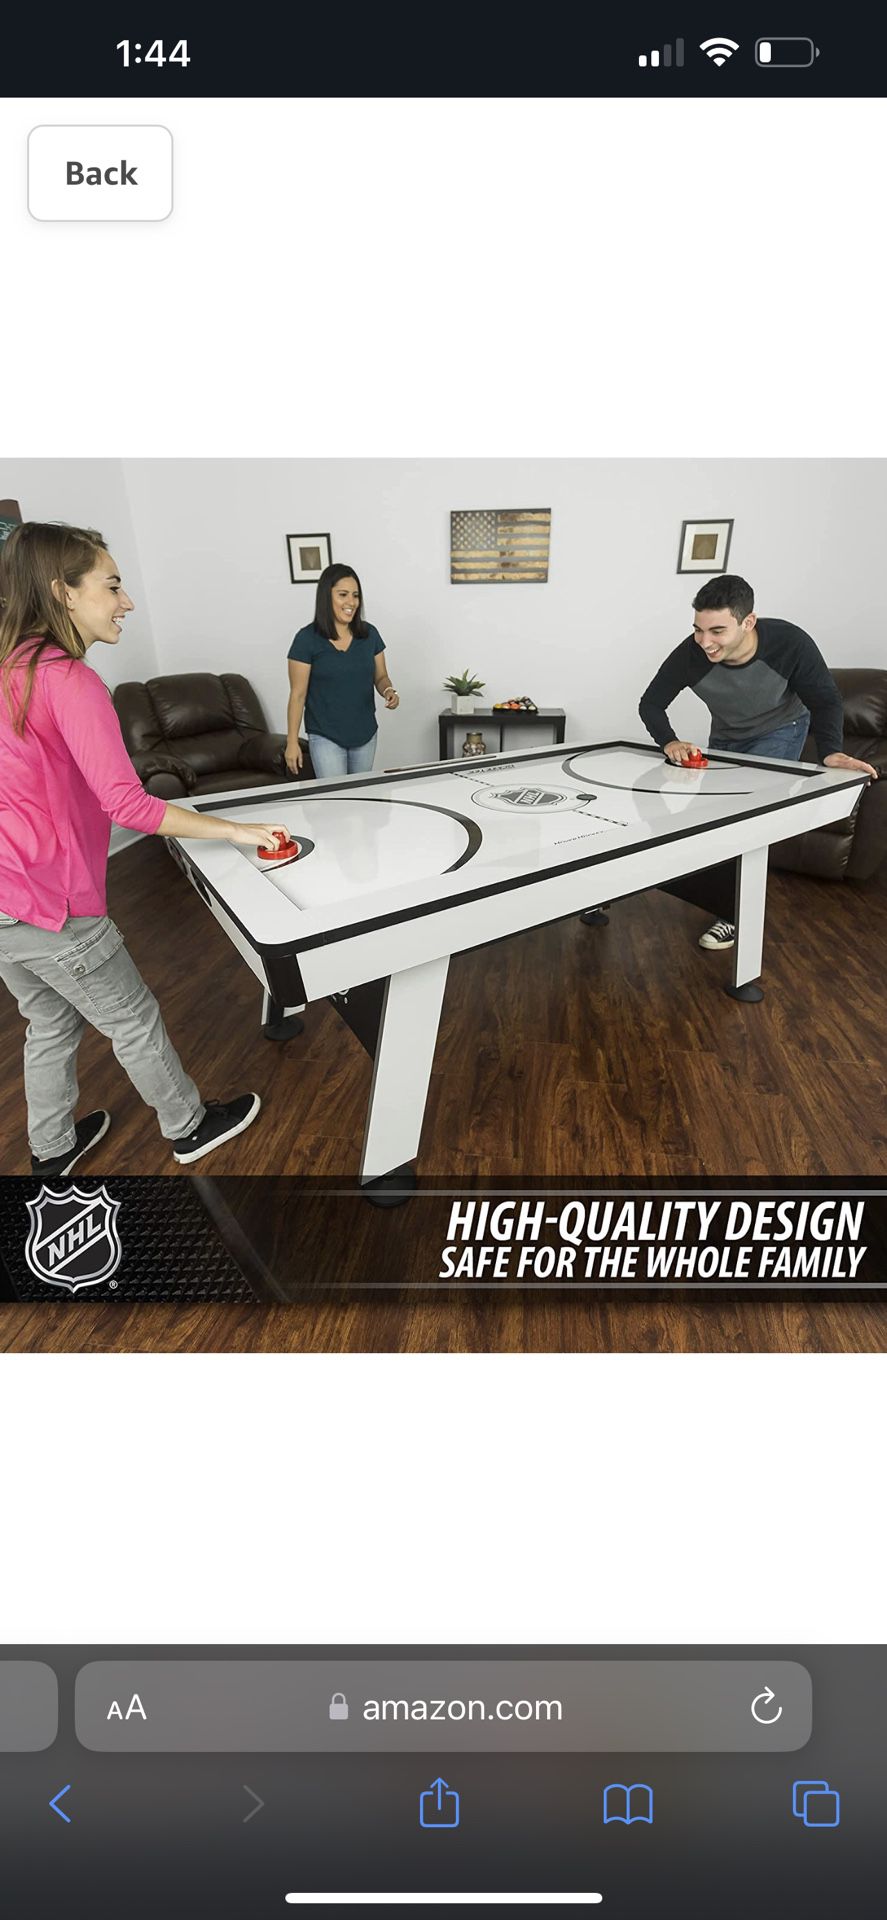 2-in-1 Air Hockey Table with Table Tennis Top - Perfect for Family Game Room, Adult rec Room, basements, Man cave, or Garage